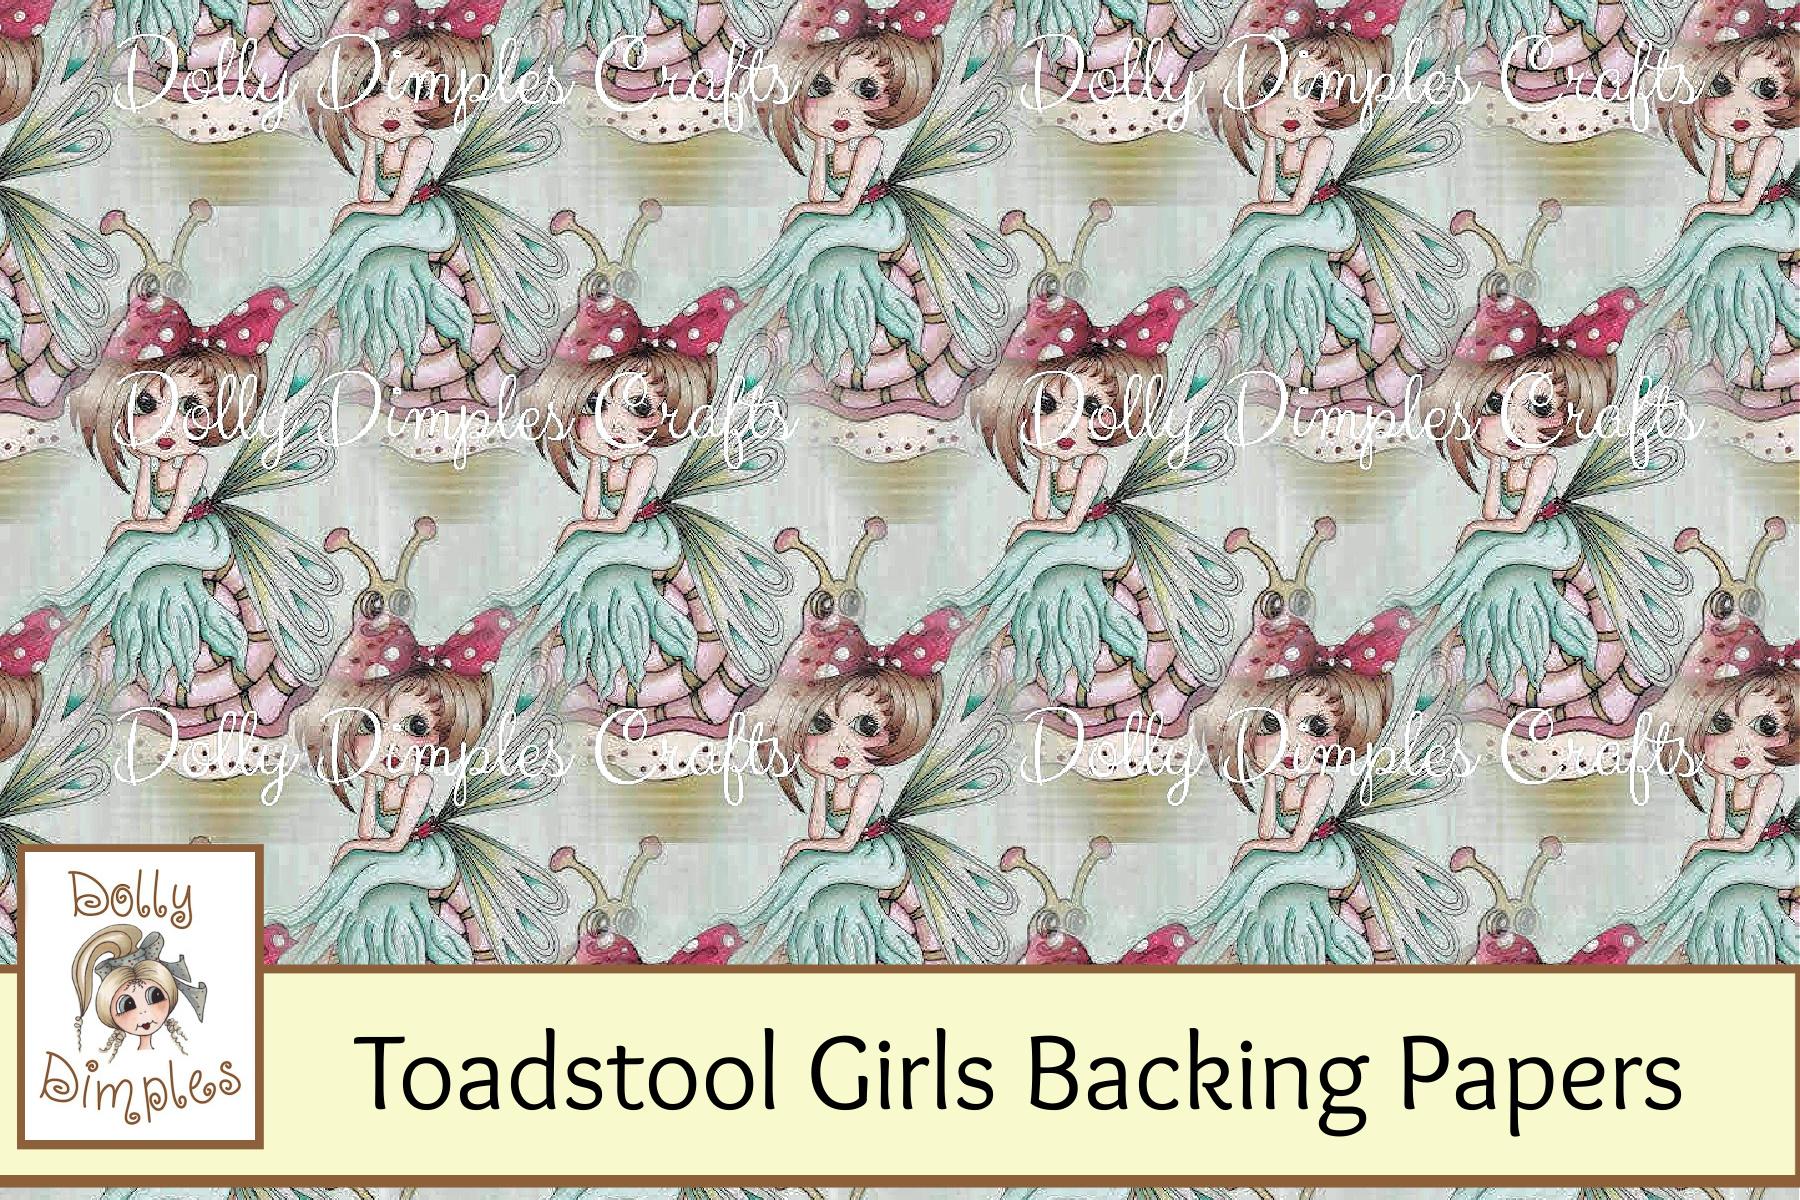 Toadstool Girls Backing Papers